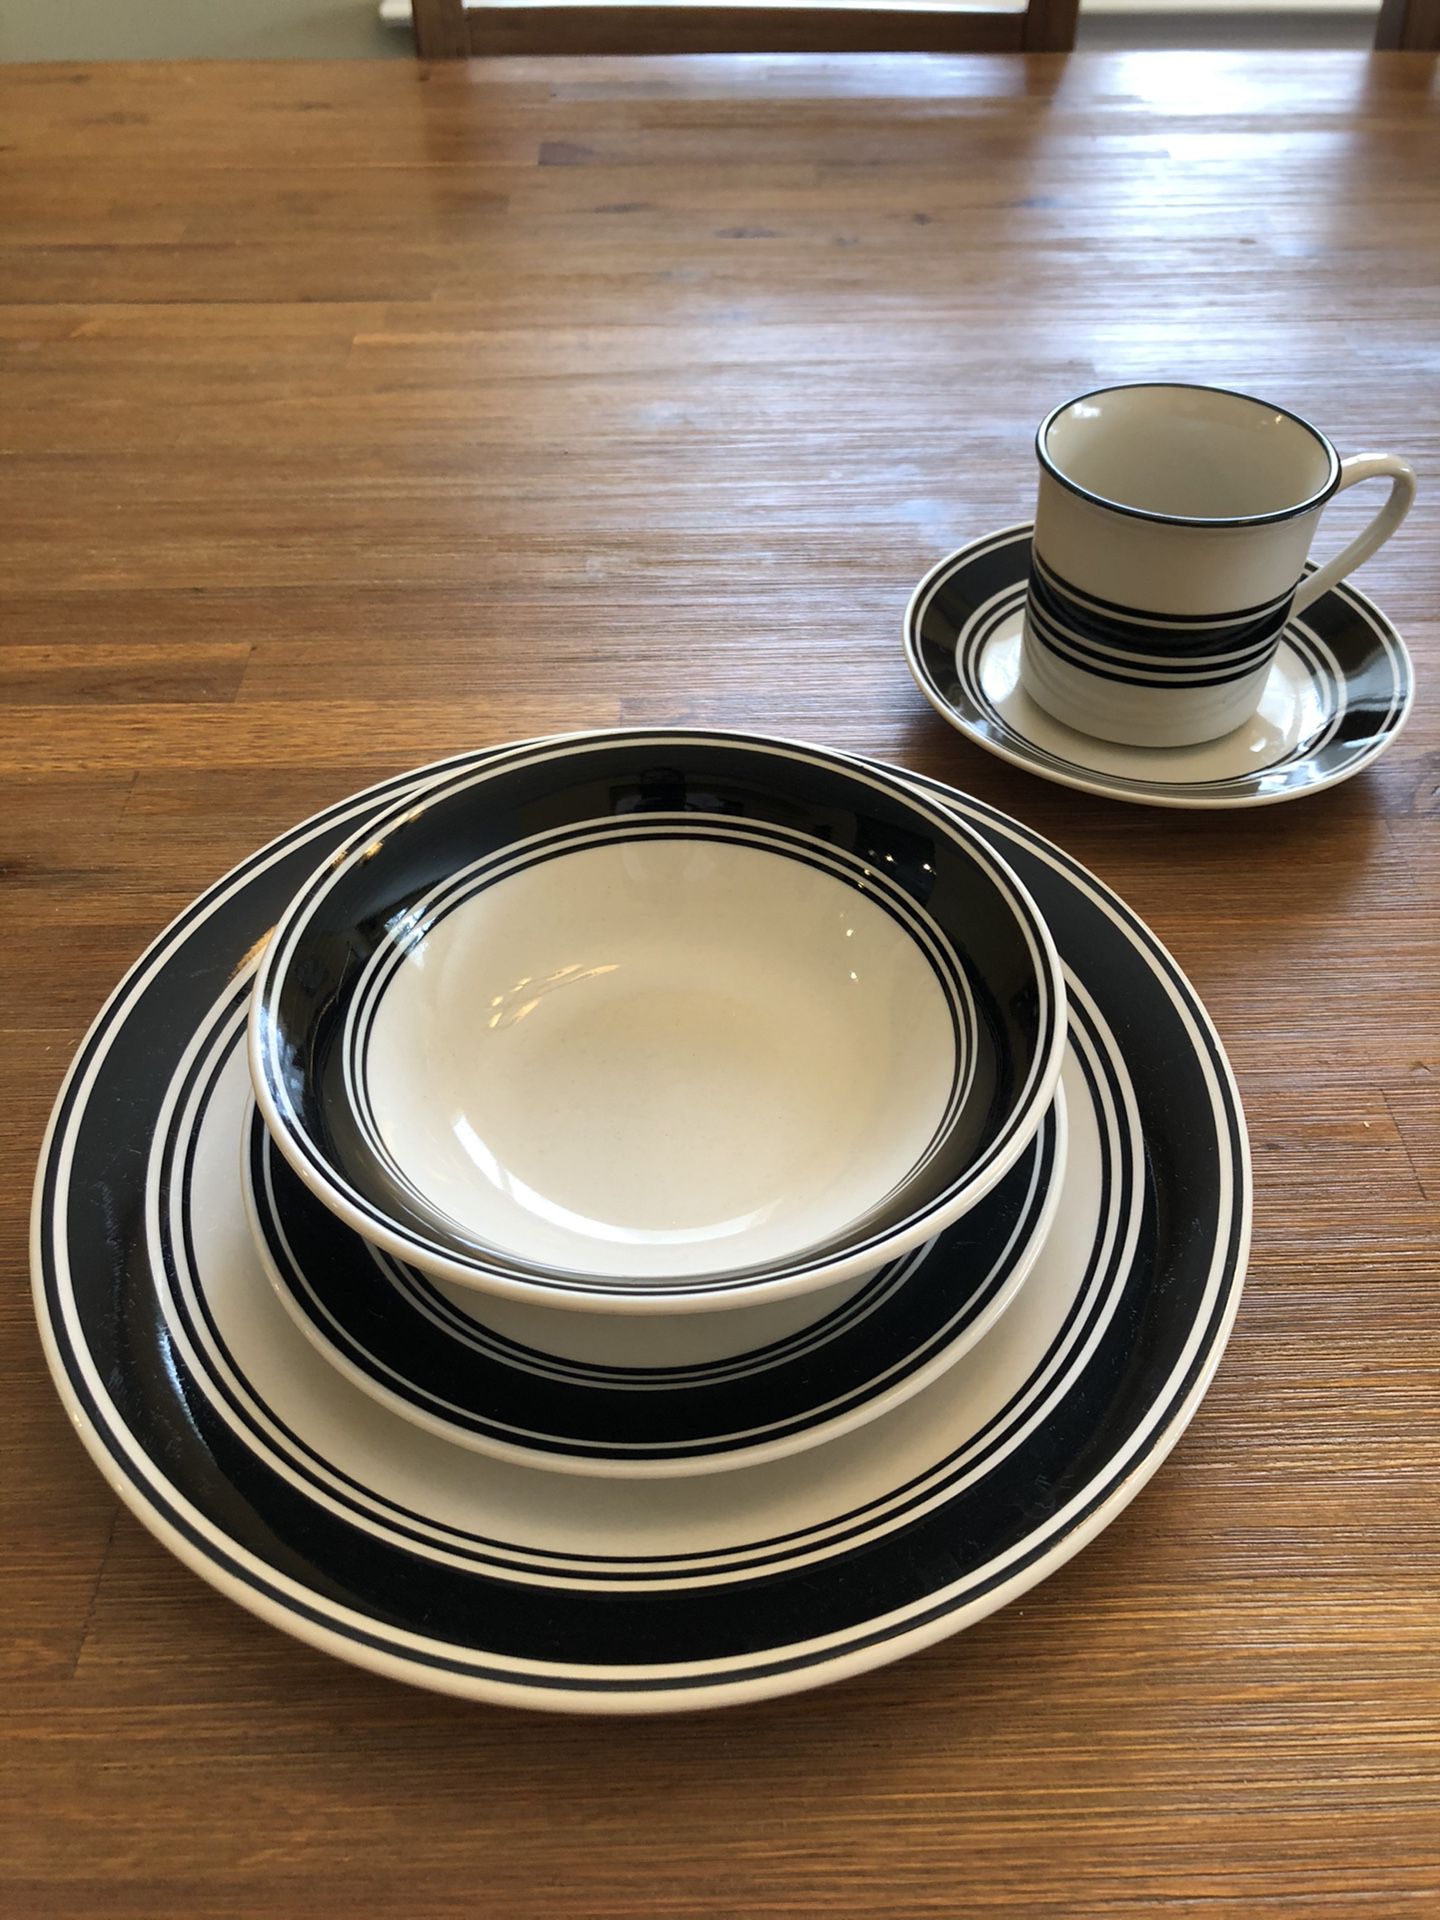 Dishes (plates, bowls, cups/mugs)